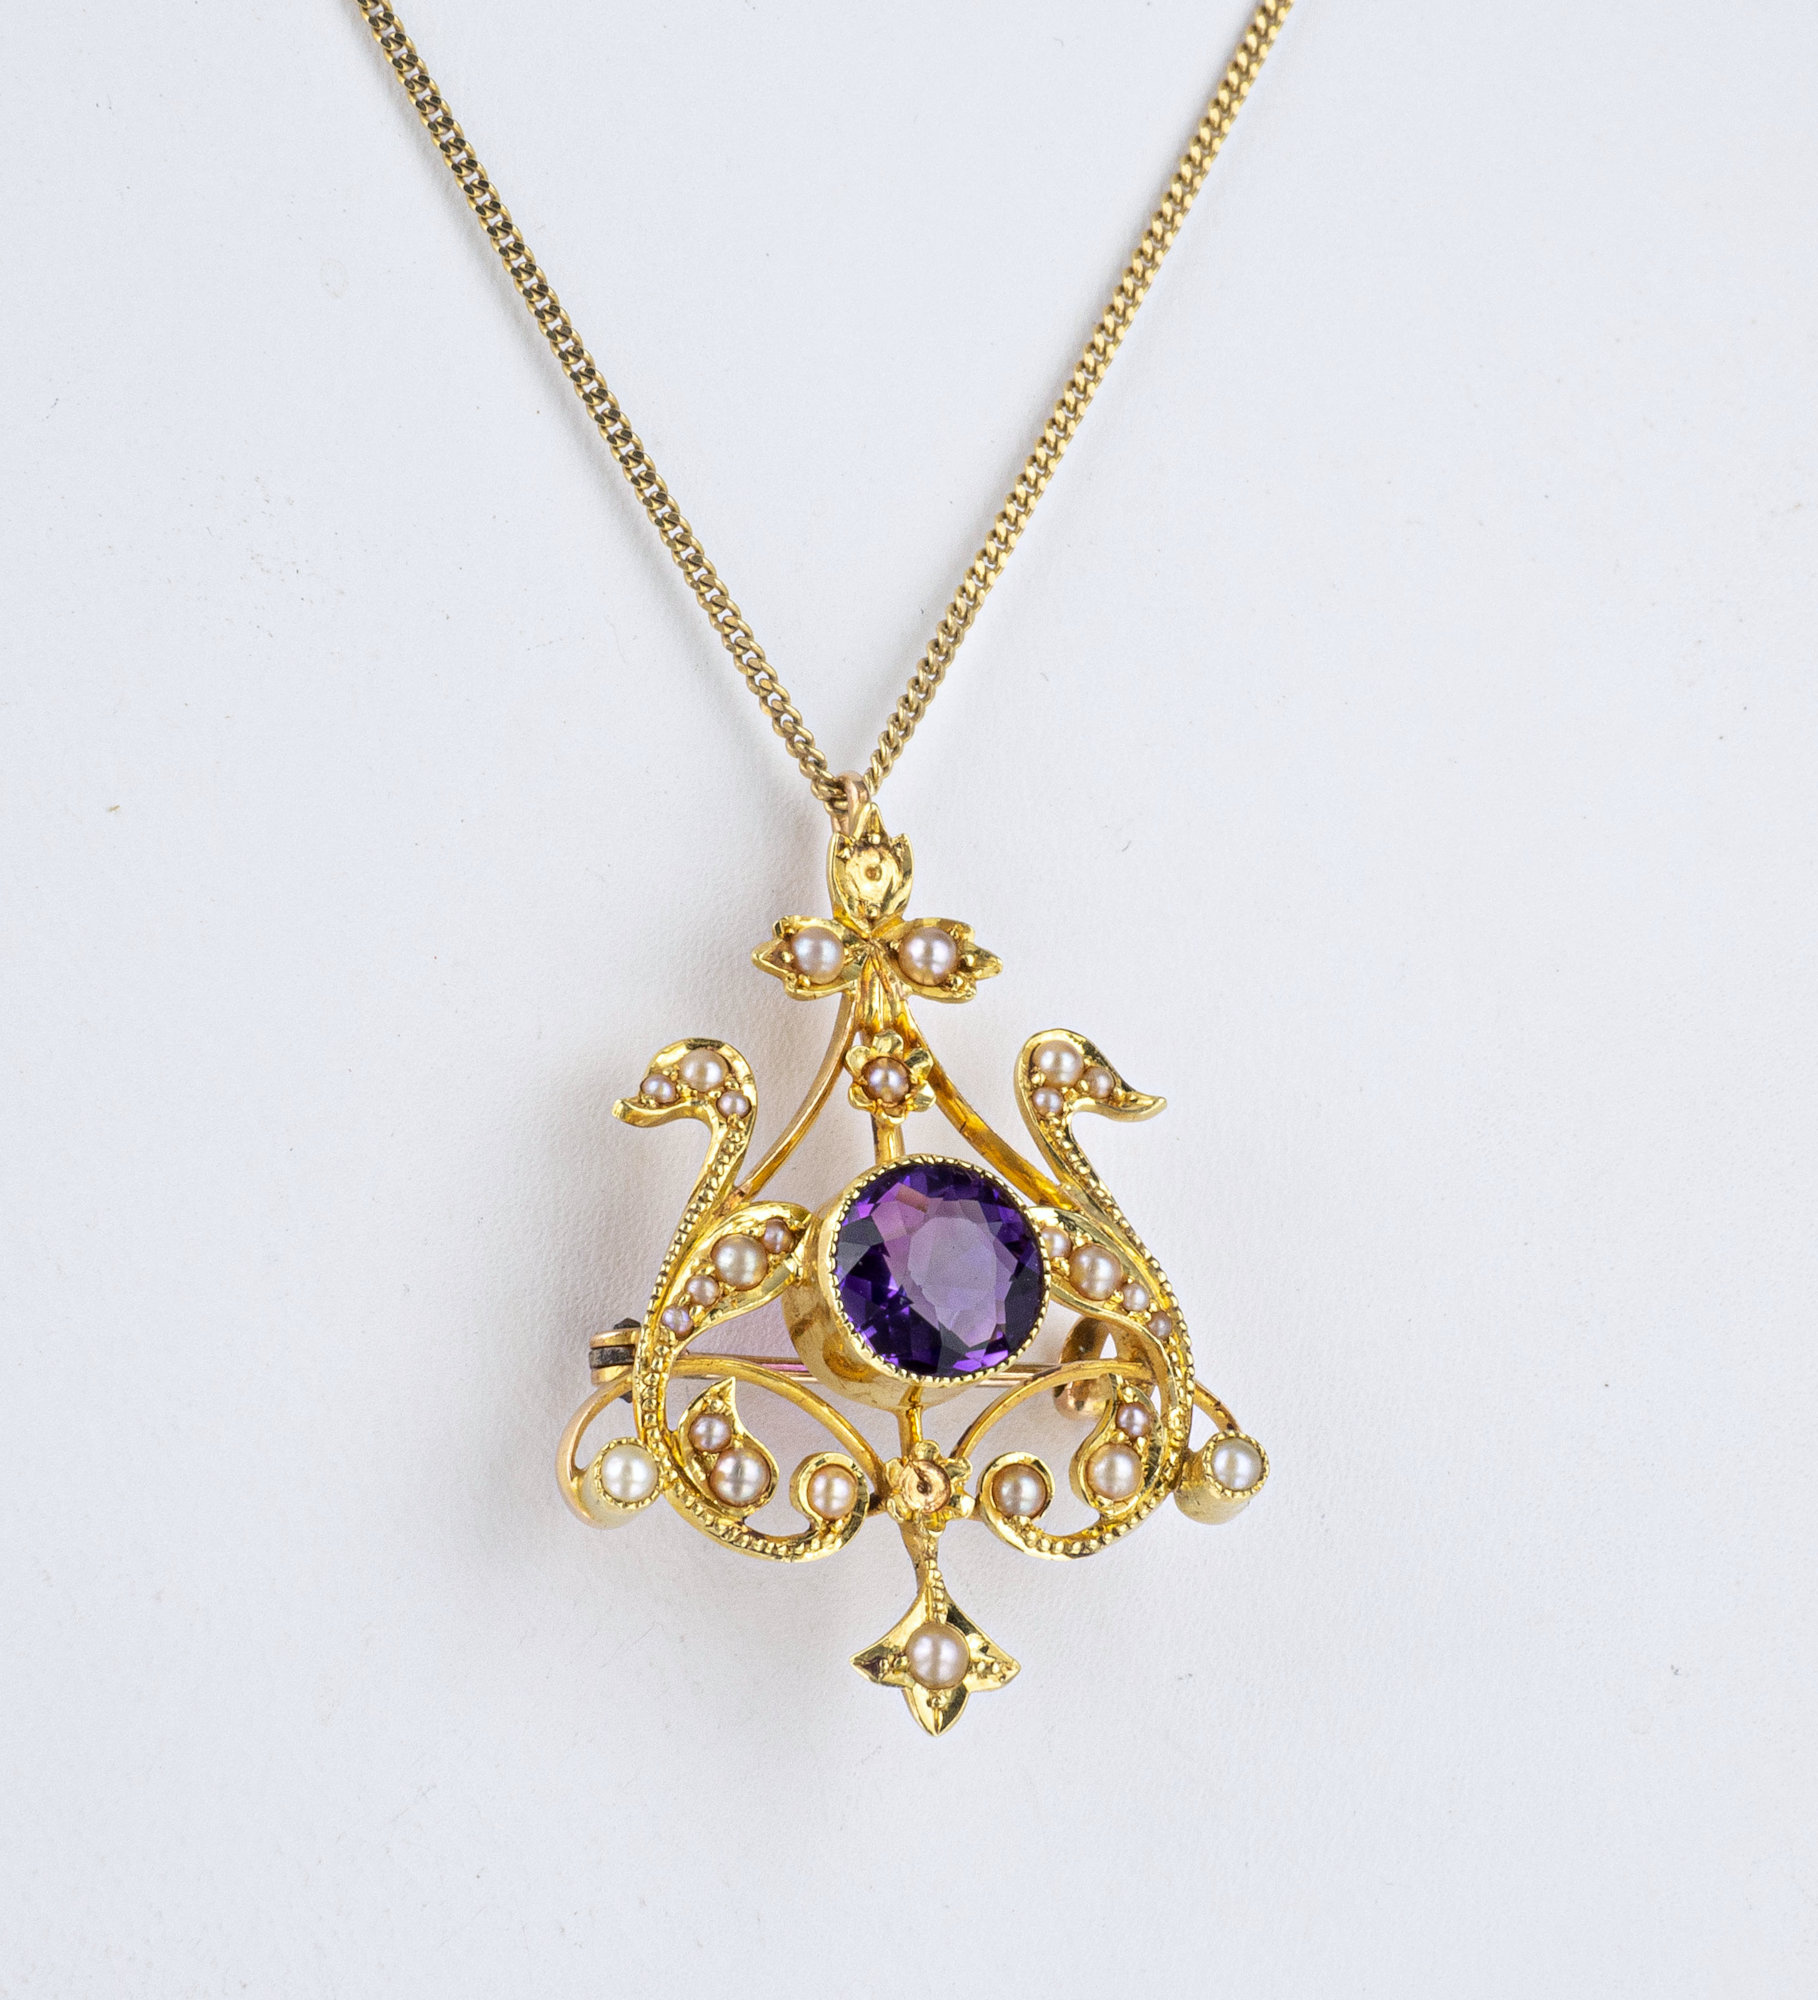 An Edwardian 18ct yellow gold, amethyst and seed pearl pendant brooch, the openwork, heart shaped